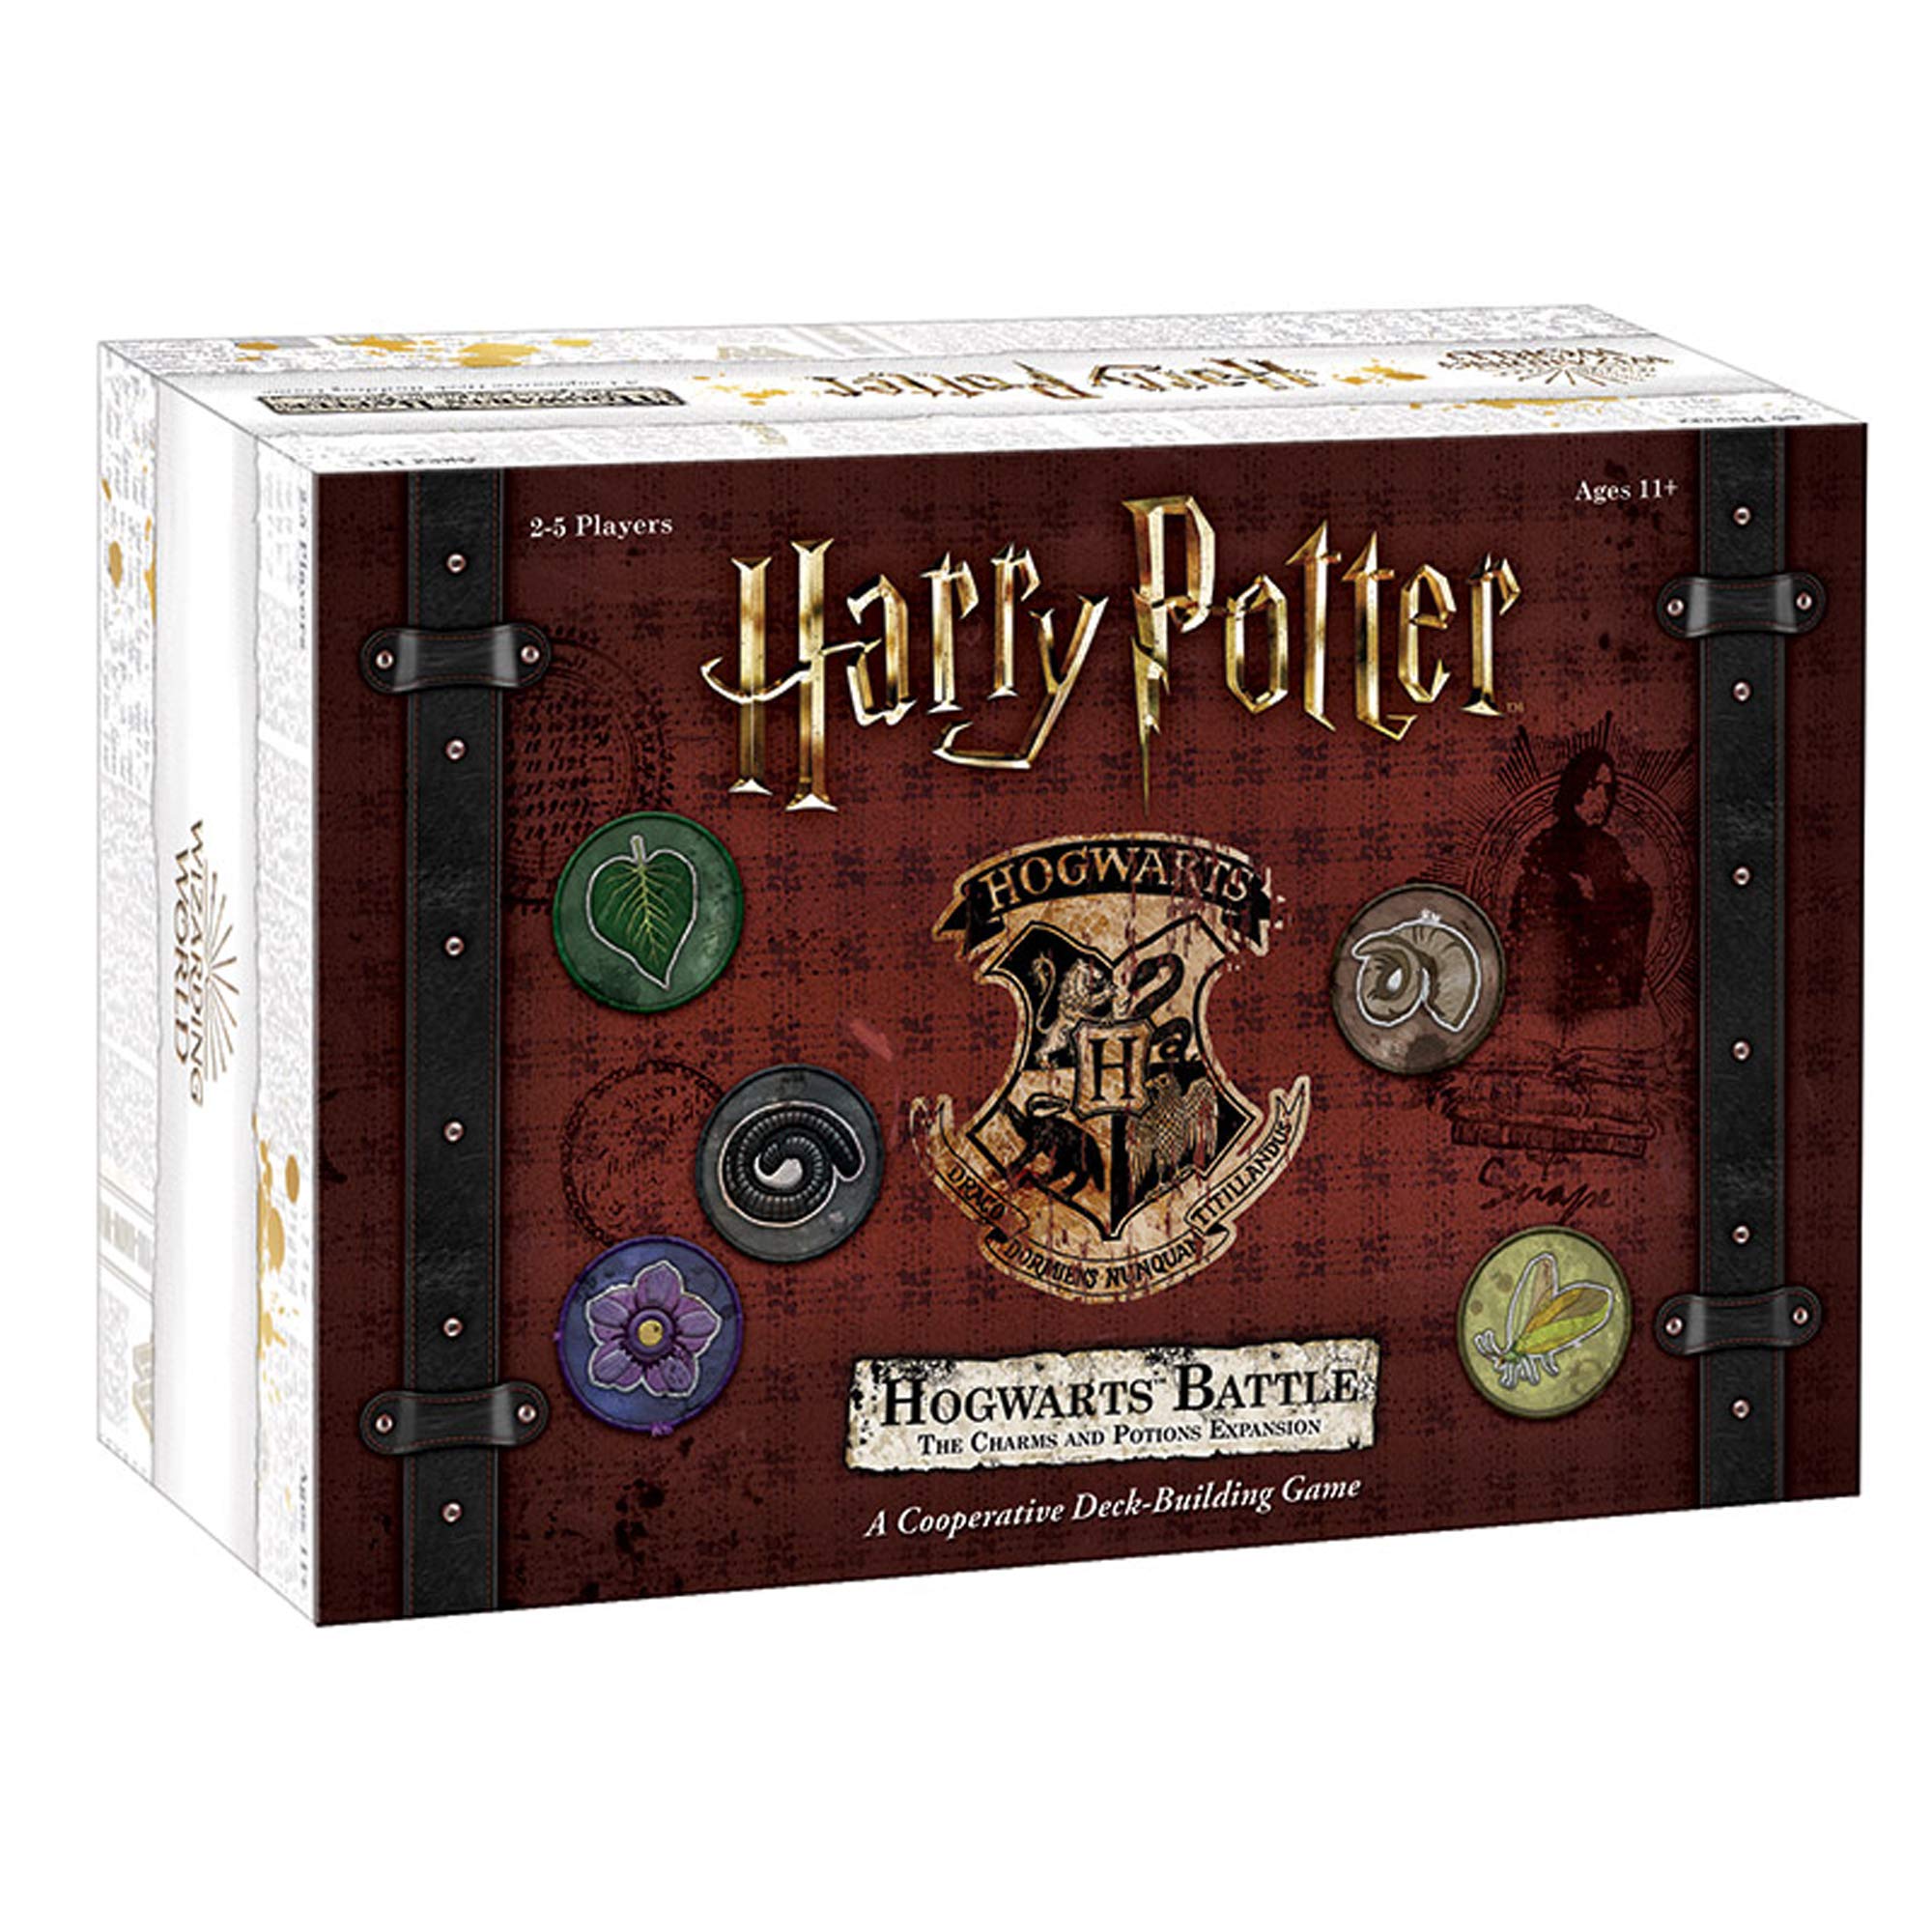 USAOPOLY Harry Potter: Hogwarts Battle - The Charms and Potions Expansion/Second Expansion to Harry Potter Deckbuilding Game/Featuring New Abilities & Cards/Officially Licensed